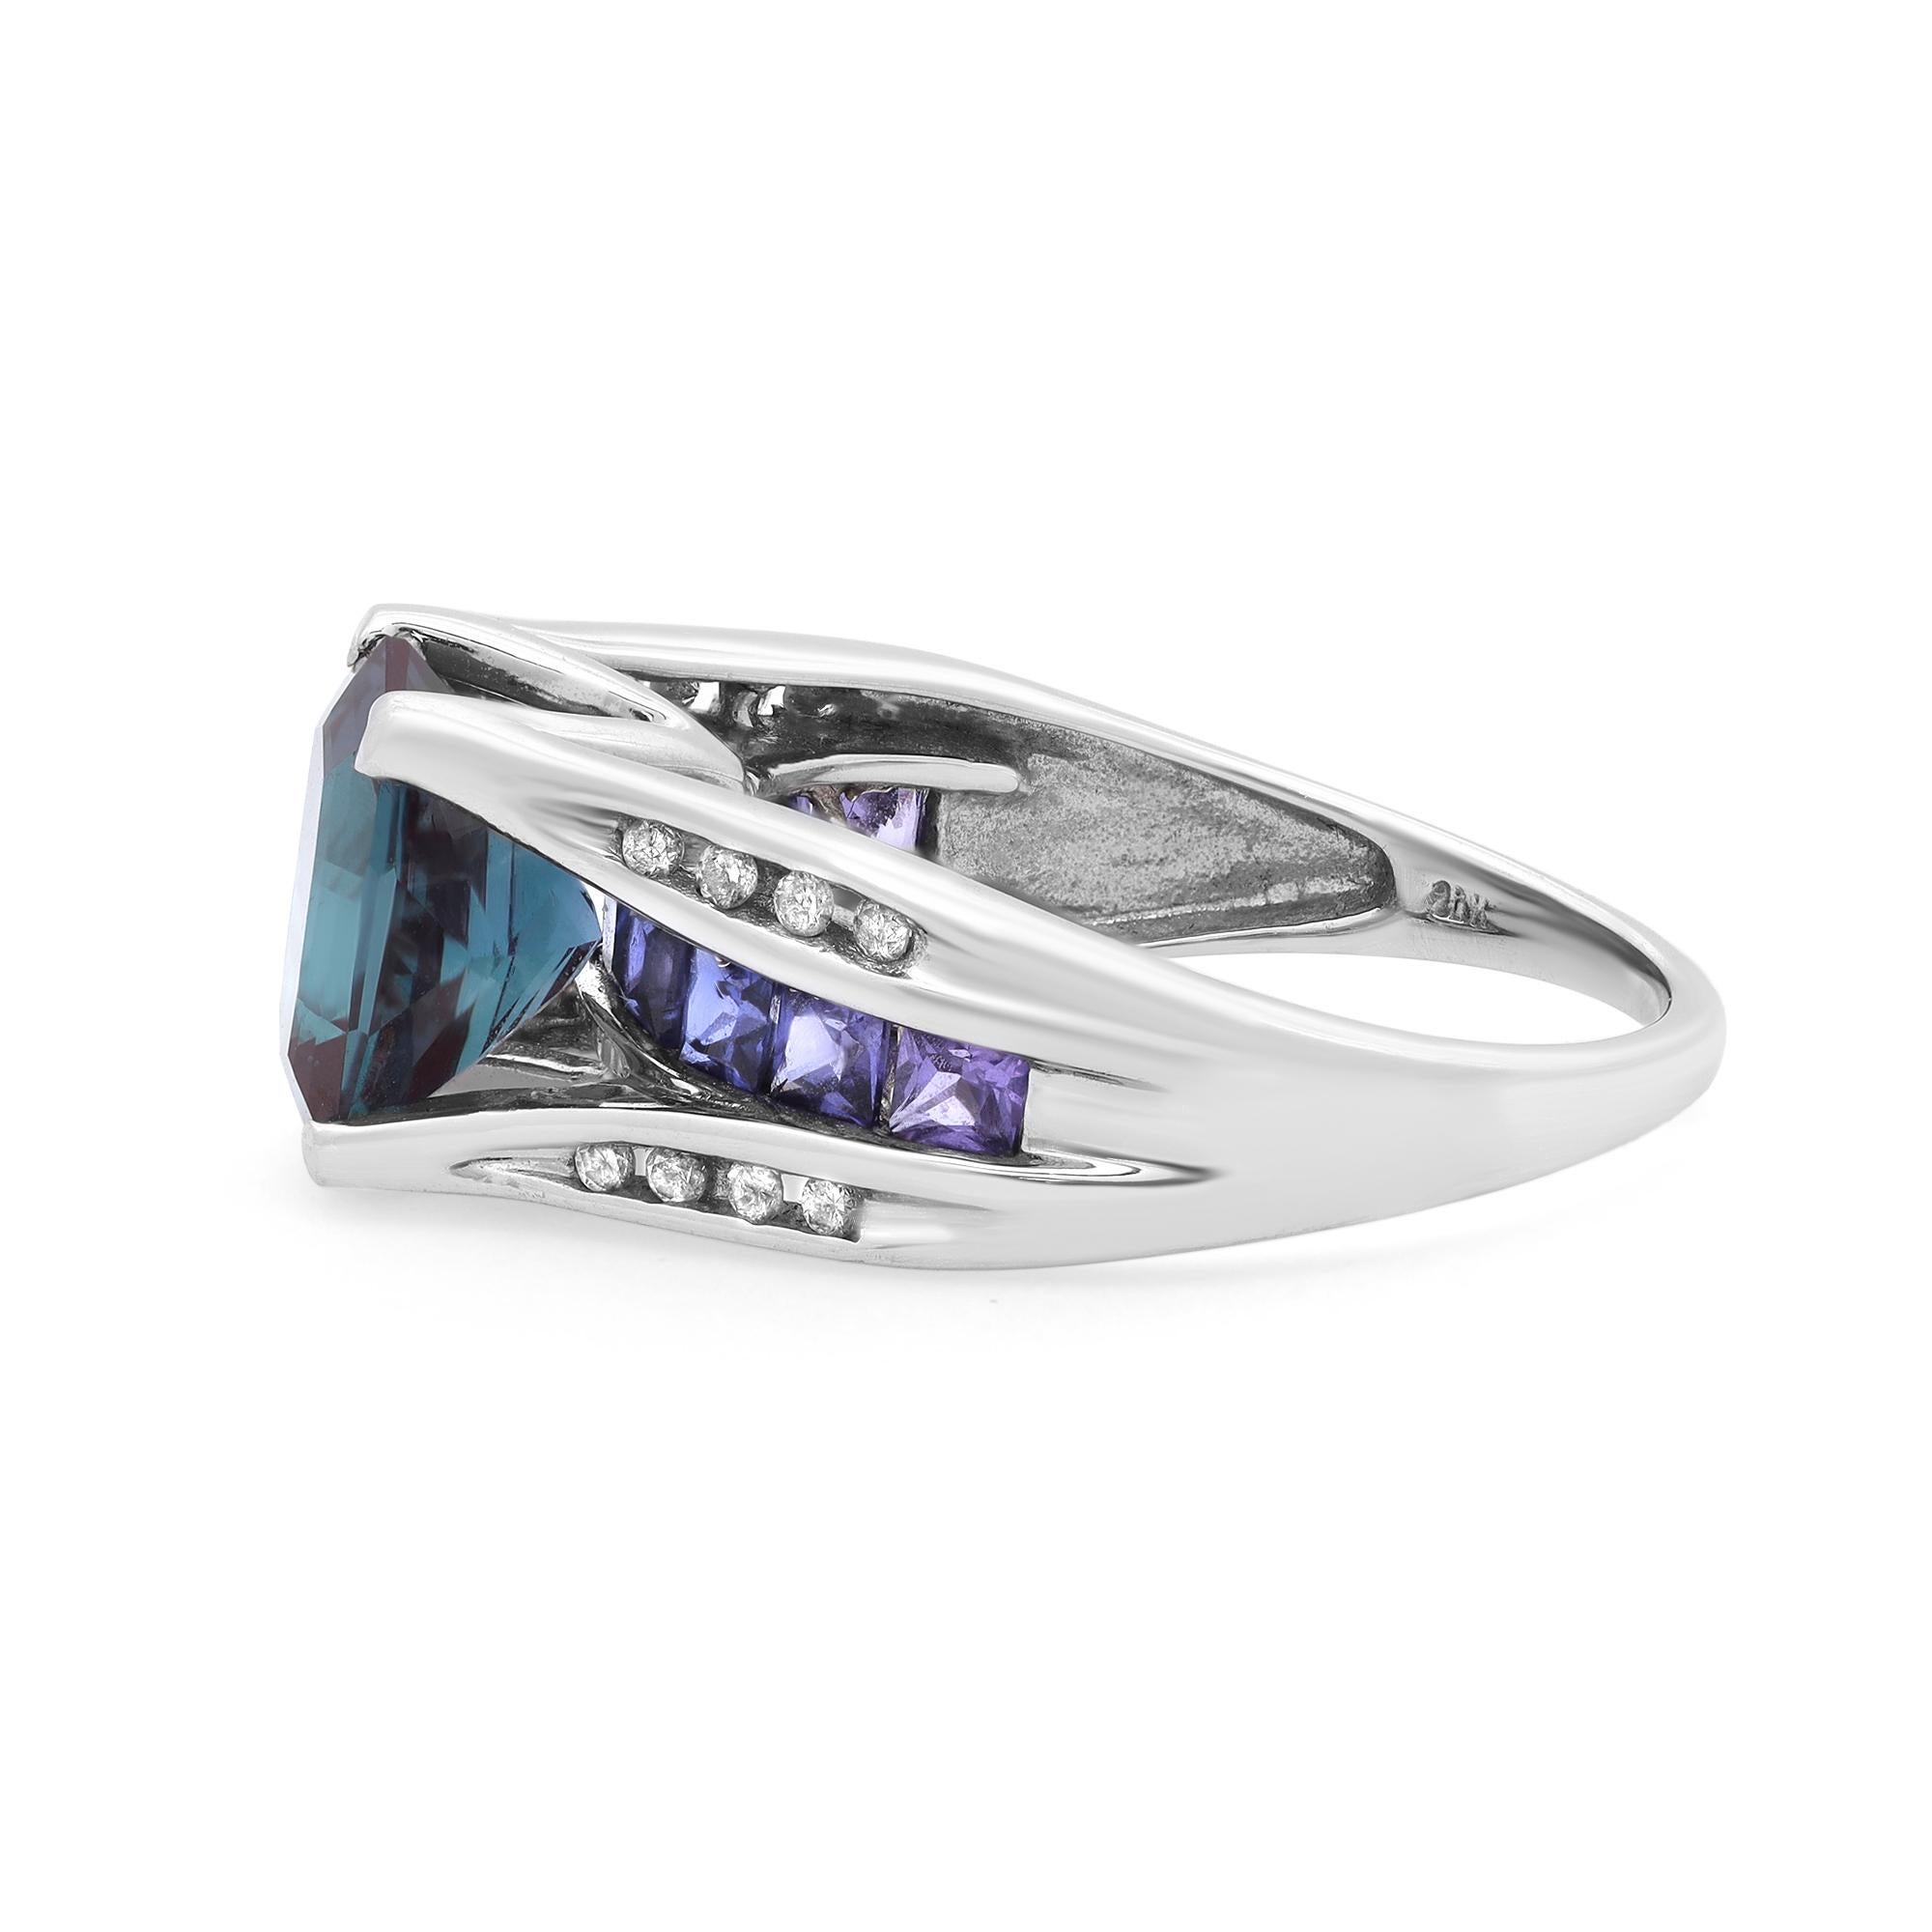 This beautiful ladies band ring features a prong set center Alexandrite with square-shaped Corrundum and round cut diamonds encrusted halfway through the band. Crafted in high polished 10K white gold. The ring size is 7. Total weight: 5.45 grams.